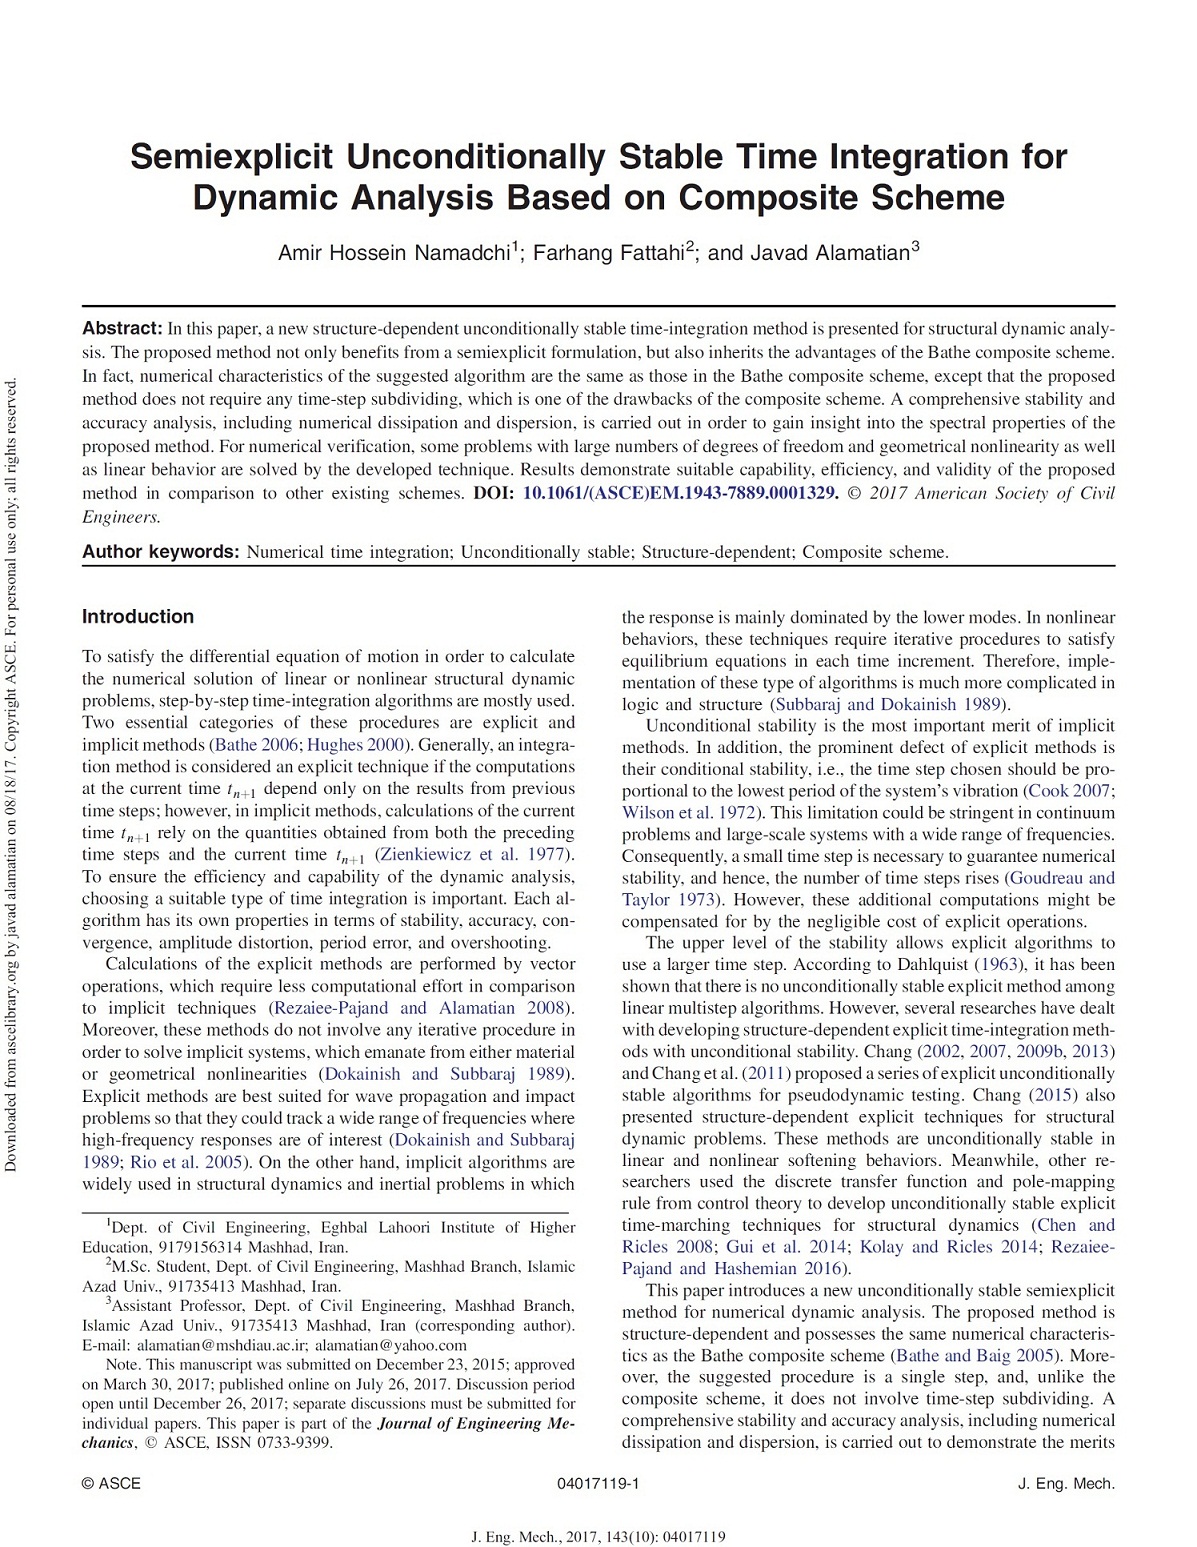 2017 Semiexplicit unconditionally stable time integration for dynamic analysis based on composite scheme